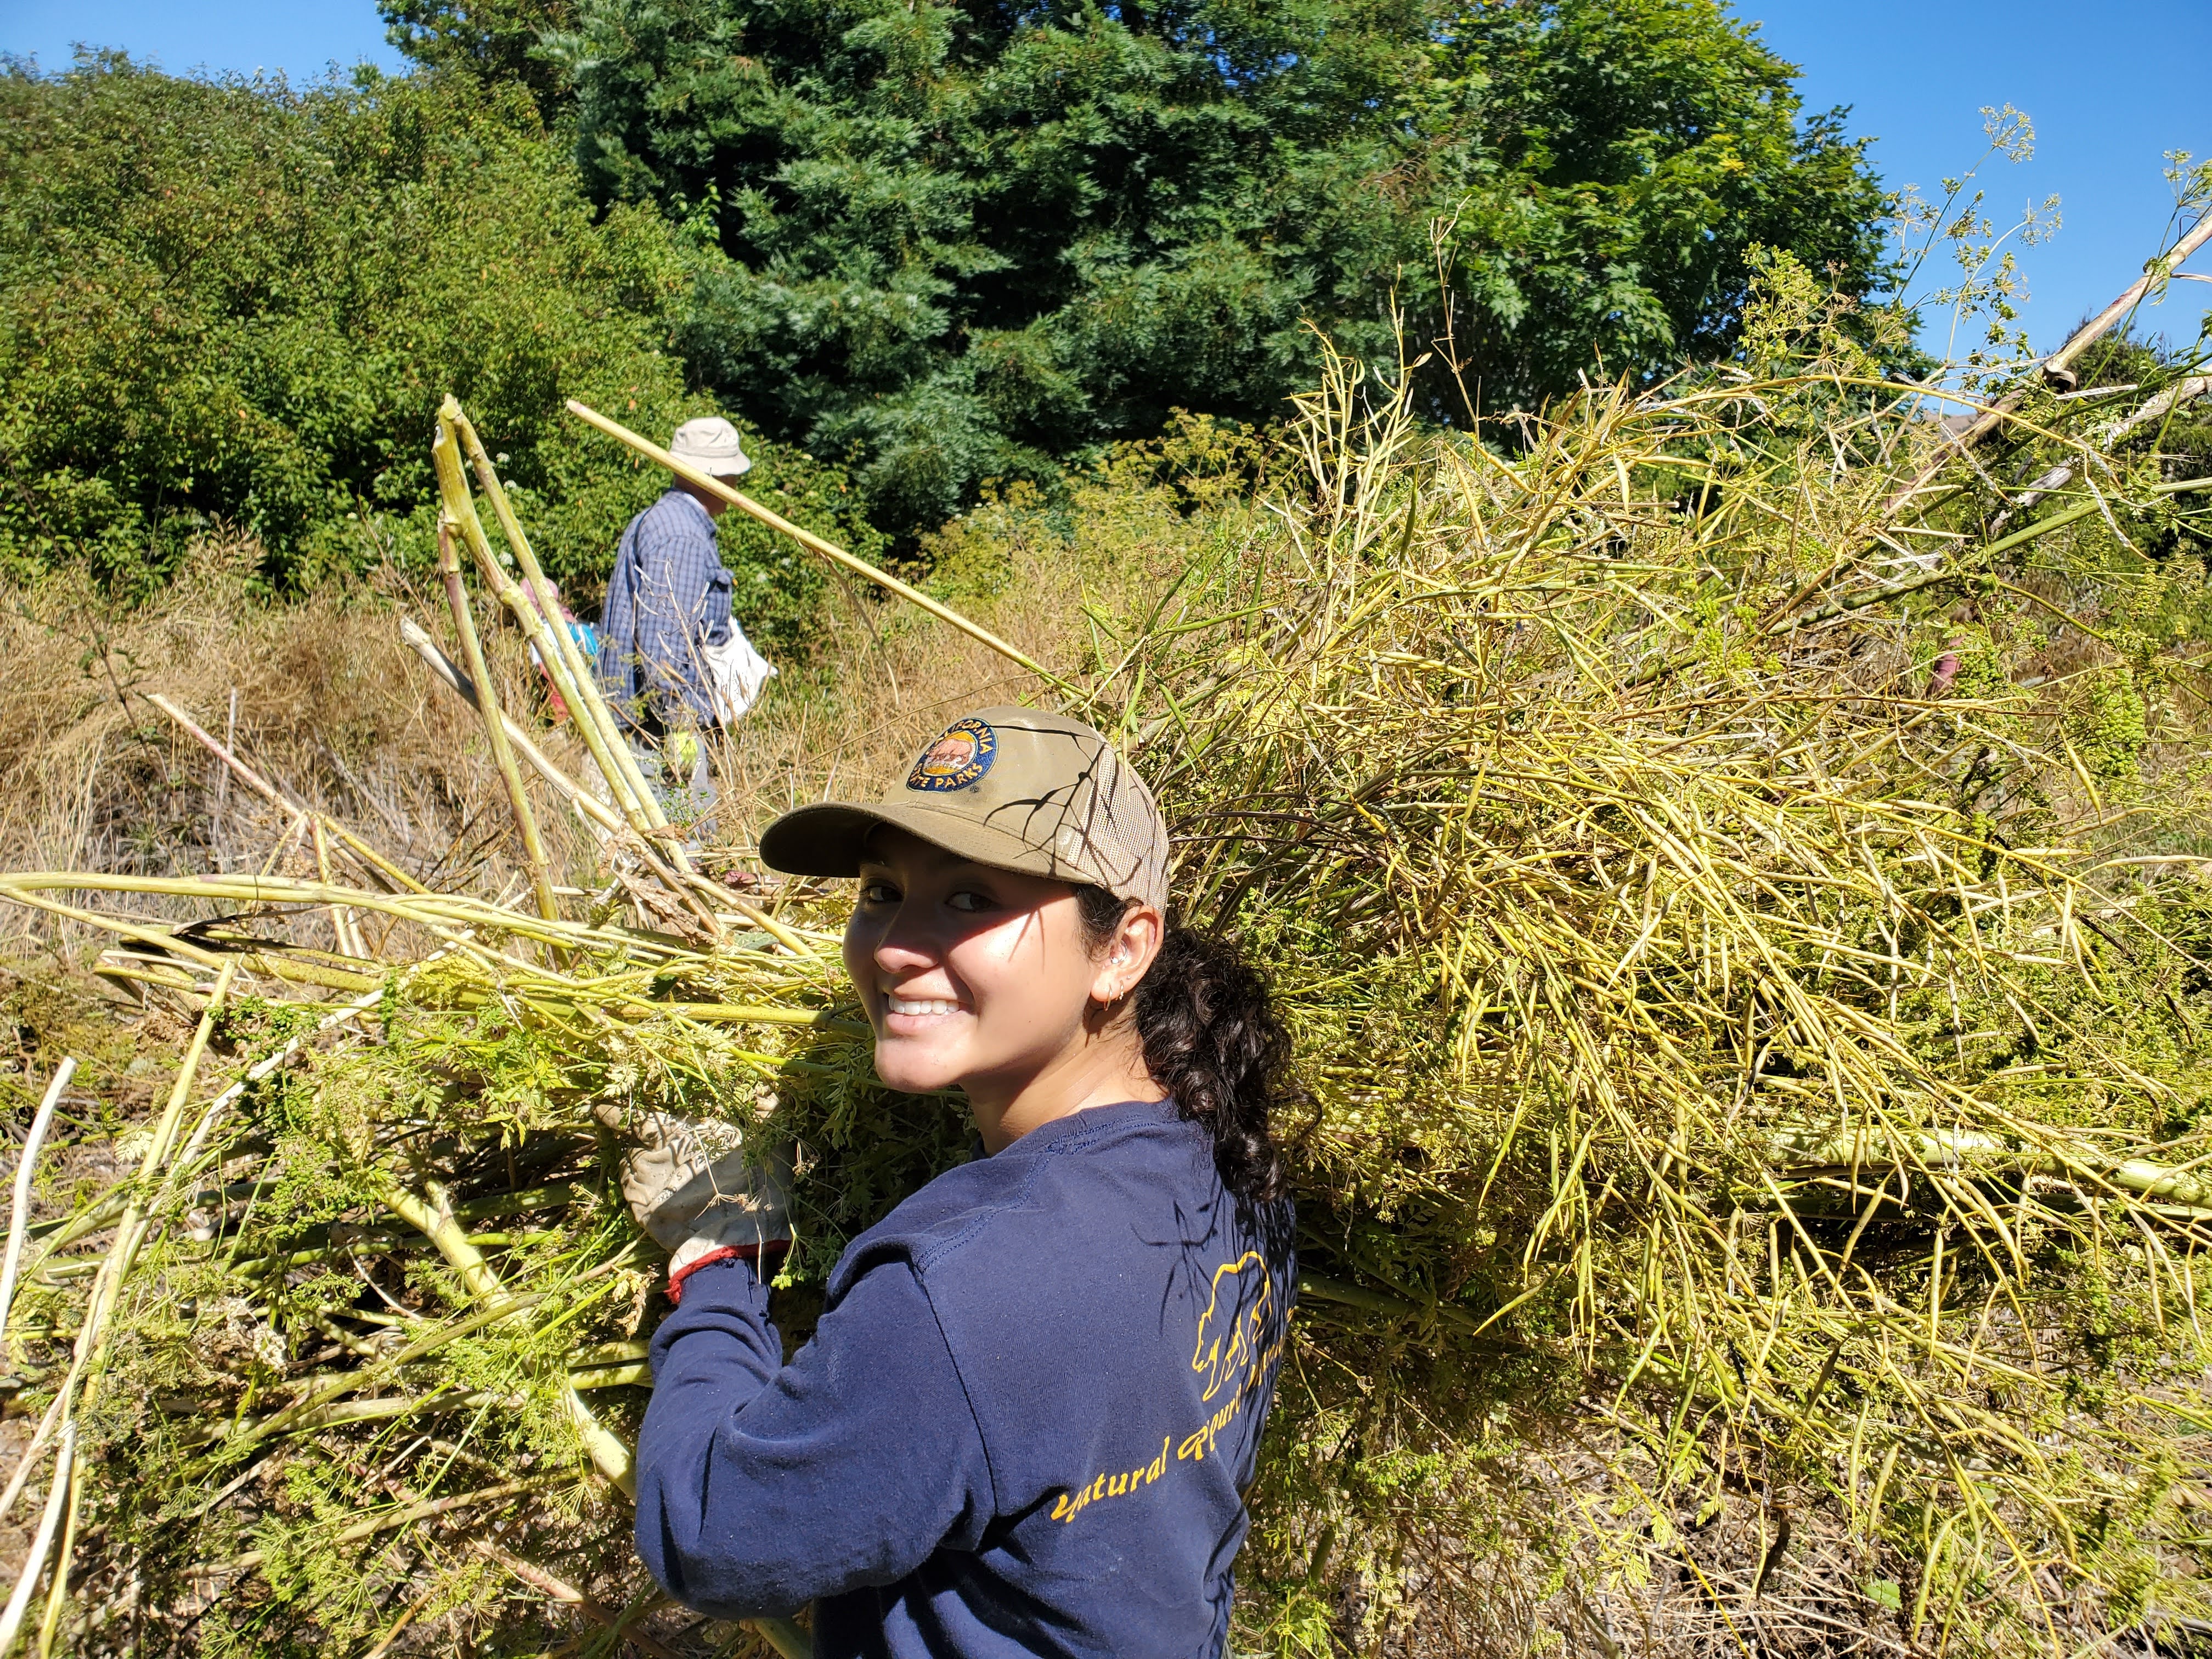 Volunteers and State Parks staff work together to remove invasive plants at Andrew Molera State Park